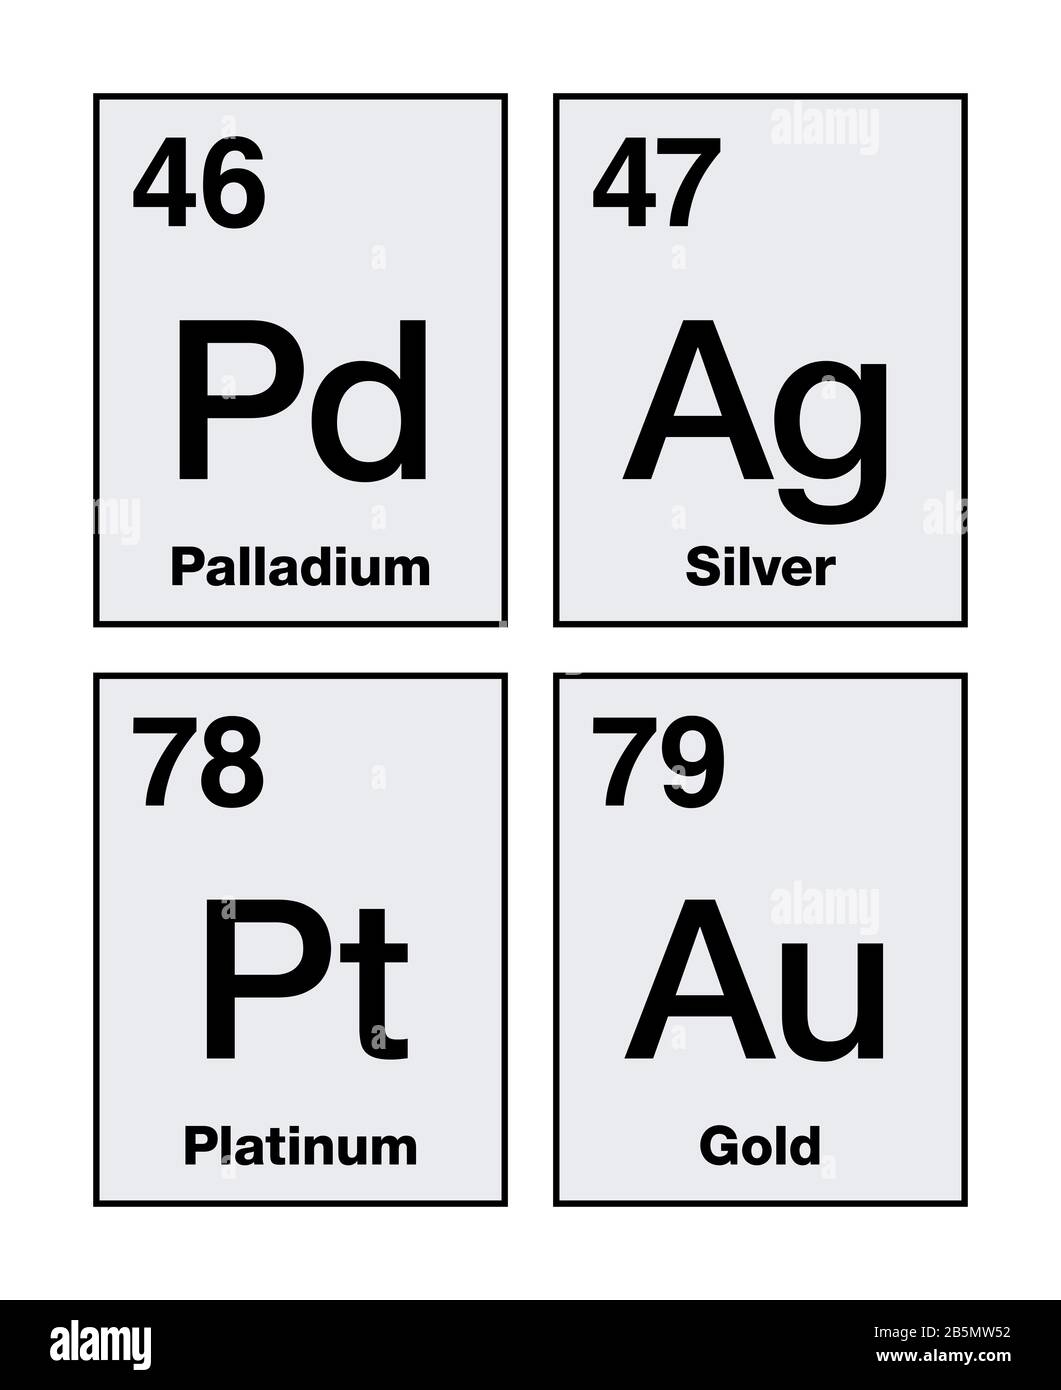 Gold, silver, platinum and palladium on periodic table. Precious metals, chemical elements with a high economic value, also used as currency. Stock Photo